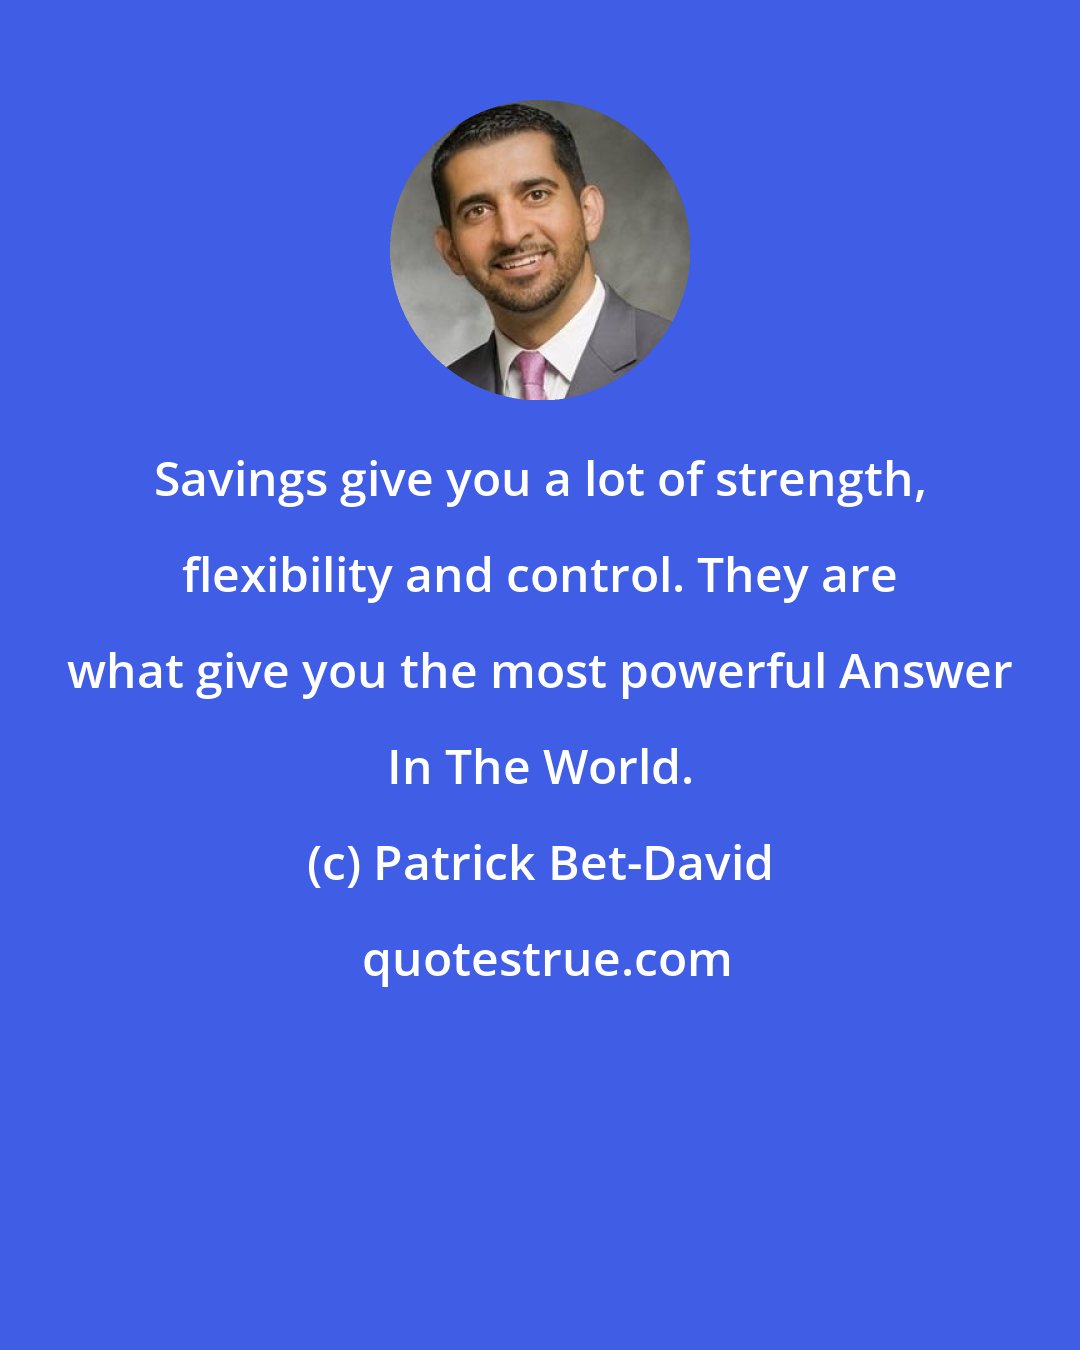 Patrick Bet-David: Savings give you a lot of strength, flexibility and control. They are what give you the most powerful Answer In The World.